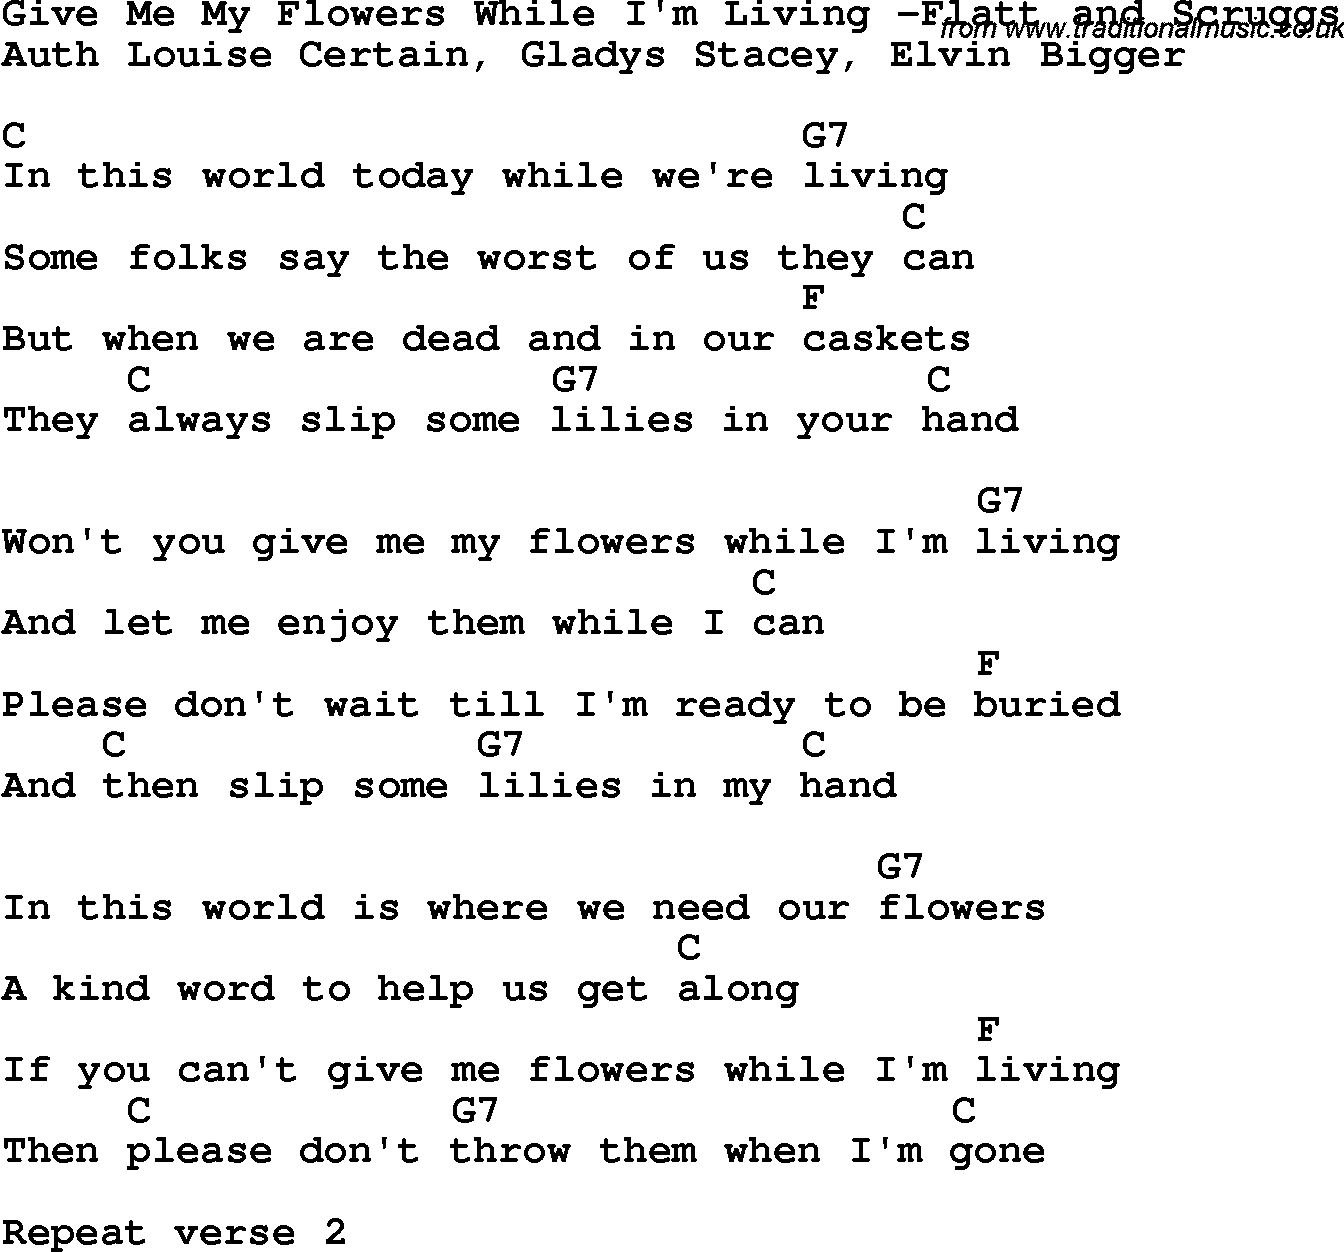 Country, Southern and Bluegrass Gospel Song Give Me My Flowers While I'm Living -Flatt and Scruggs lyrics and chords